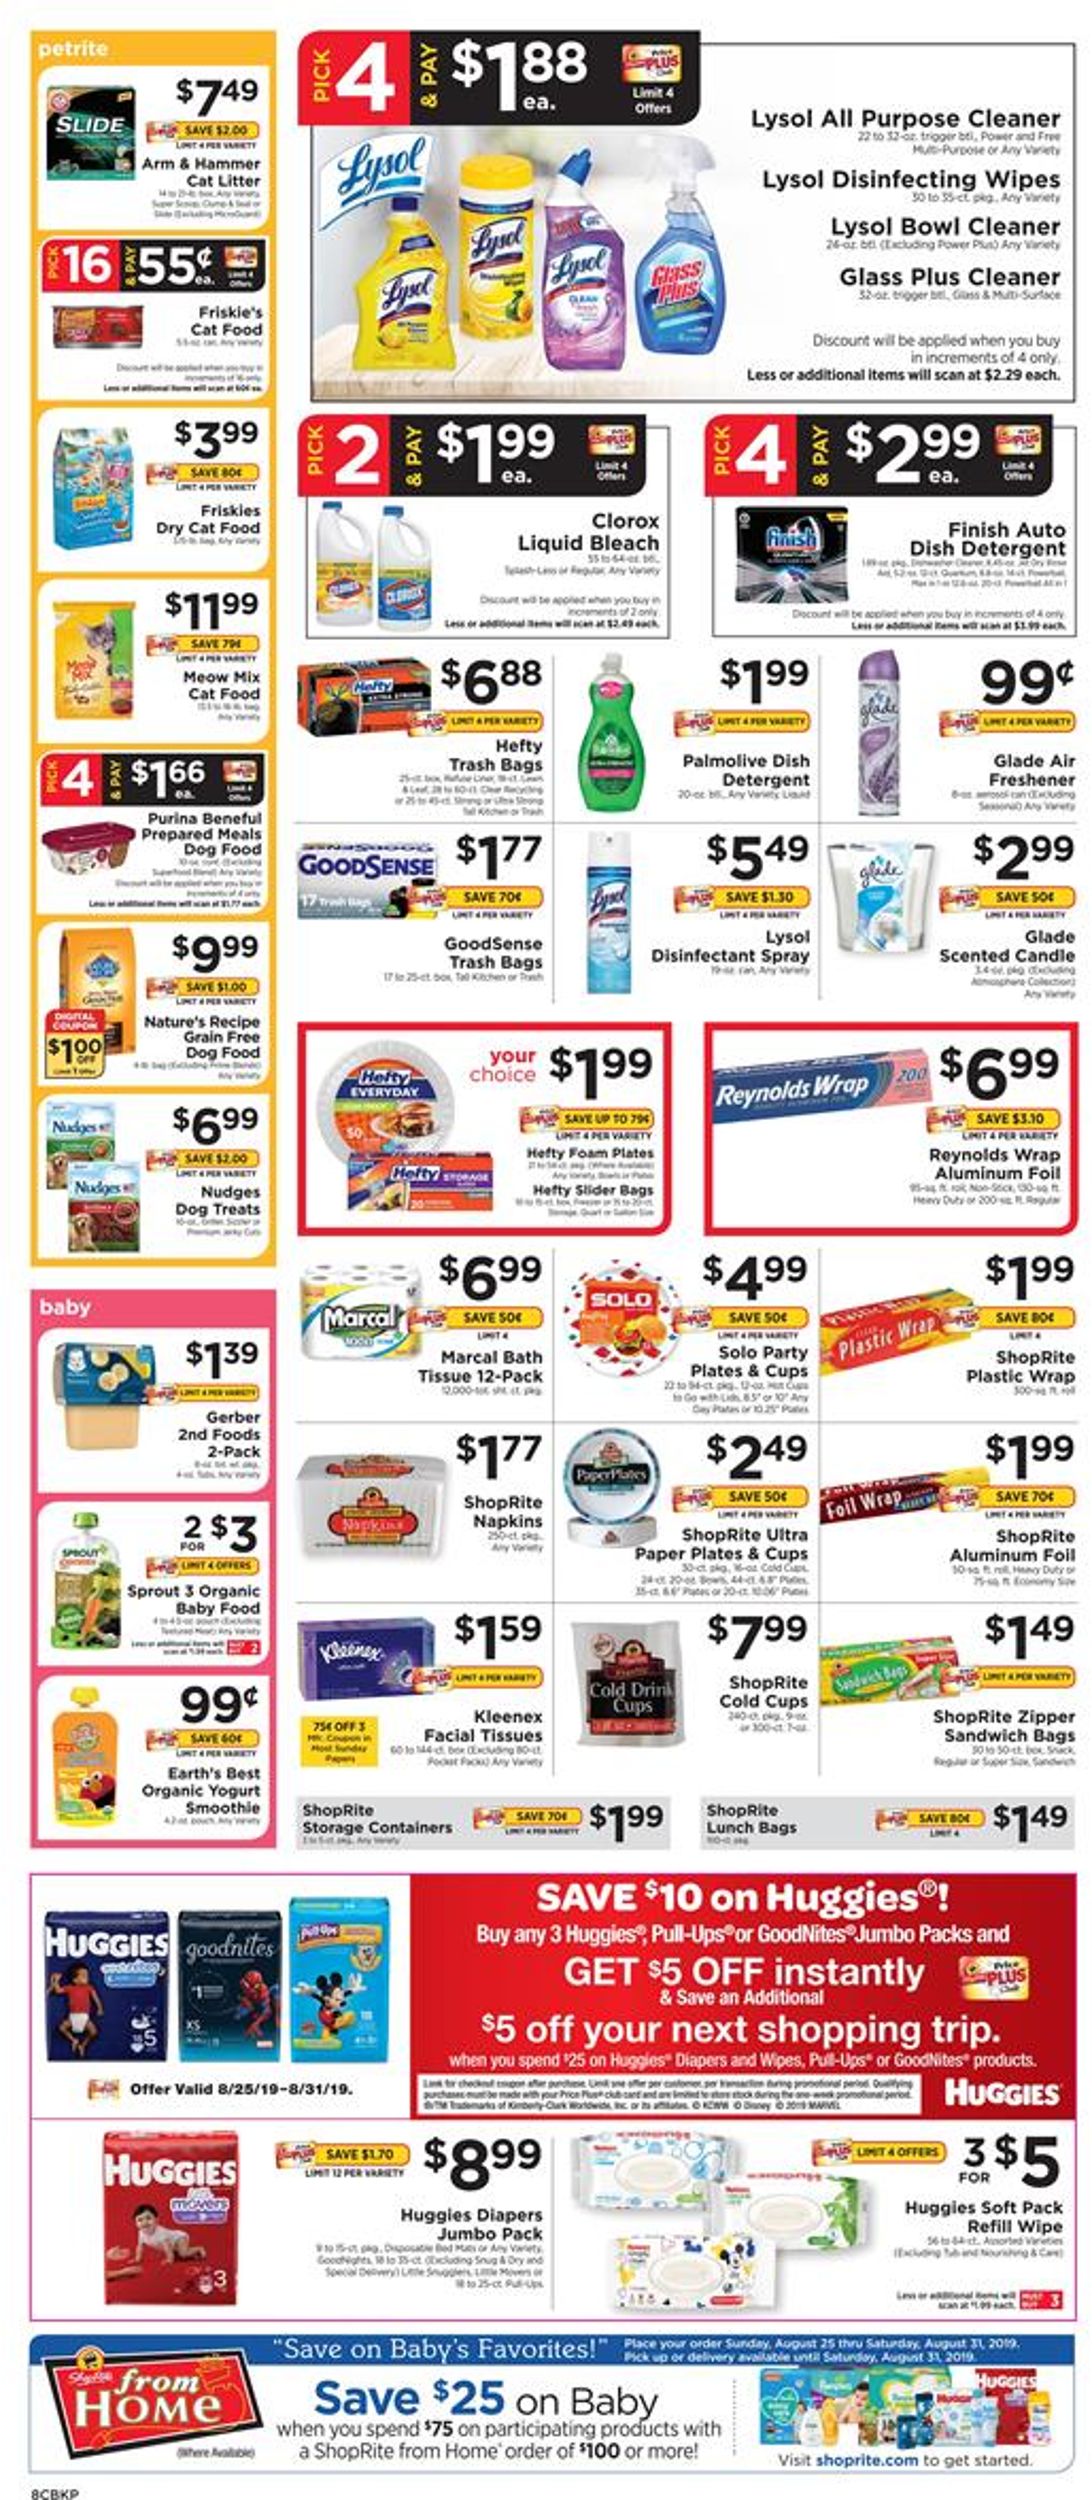 ShopRite Current weekly ad 08/25 - 08/31/2019 [8] - frequent-ads.com